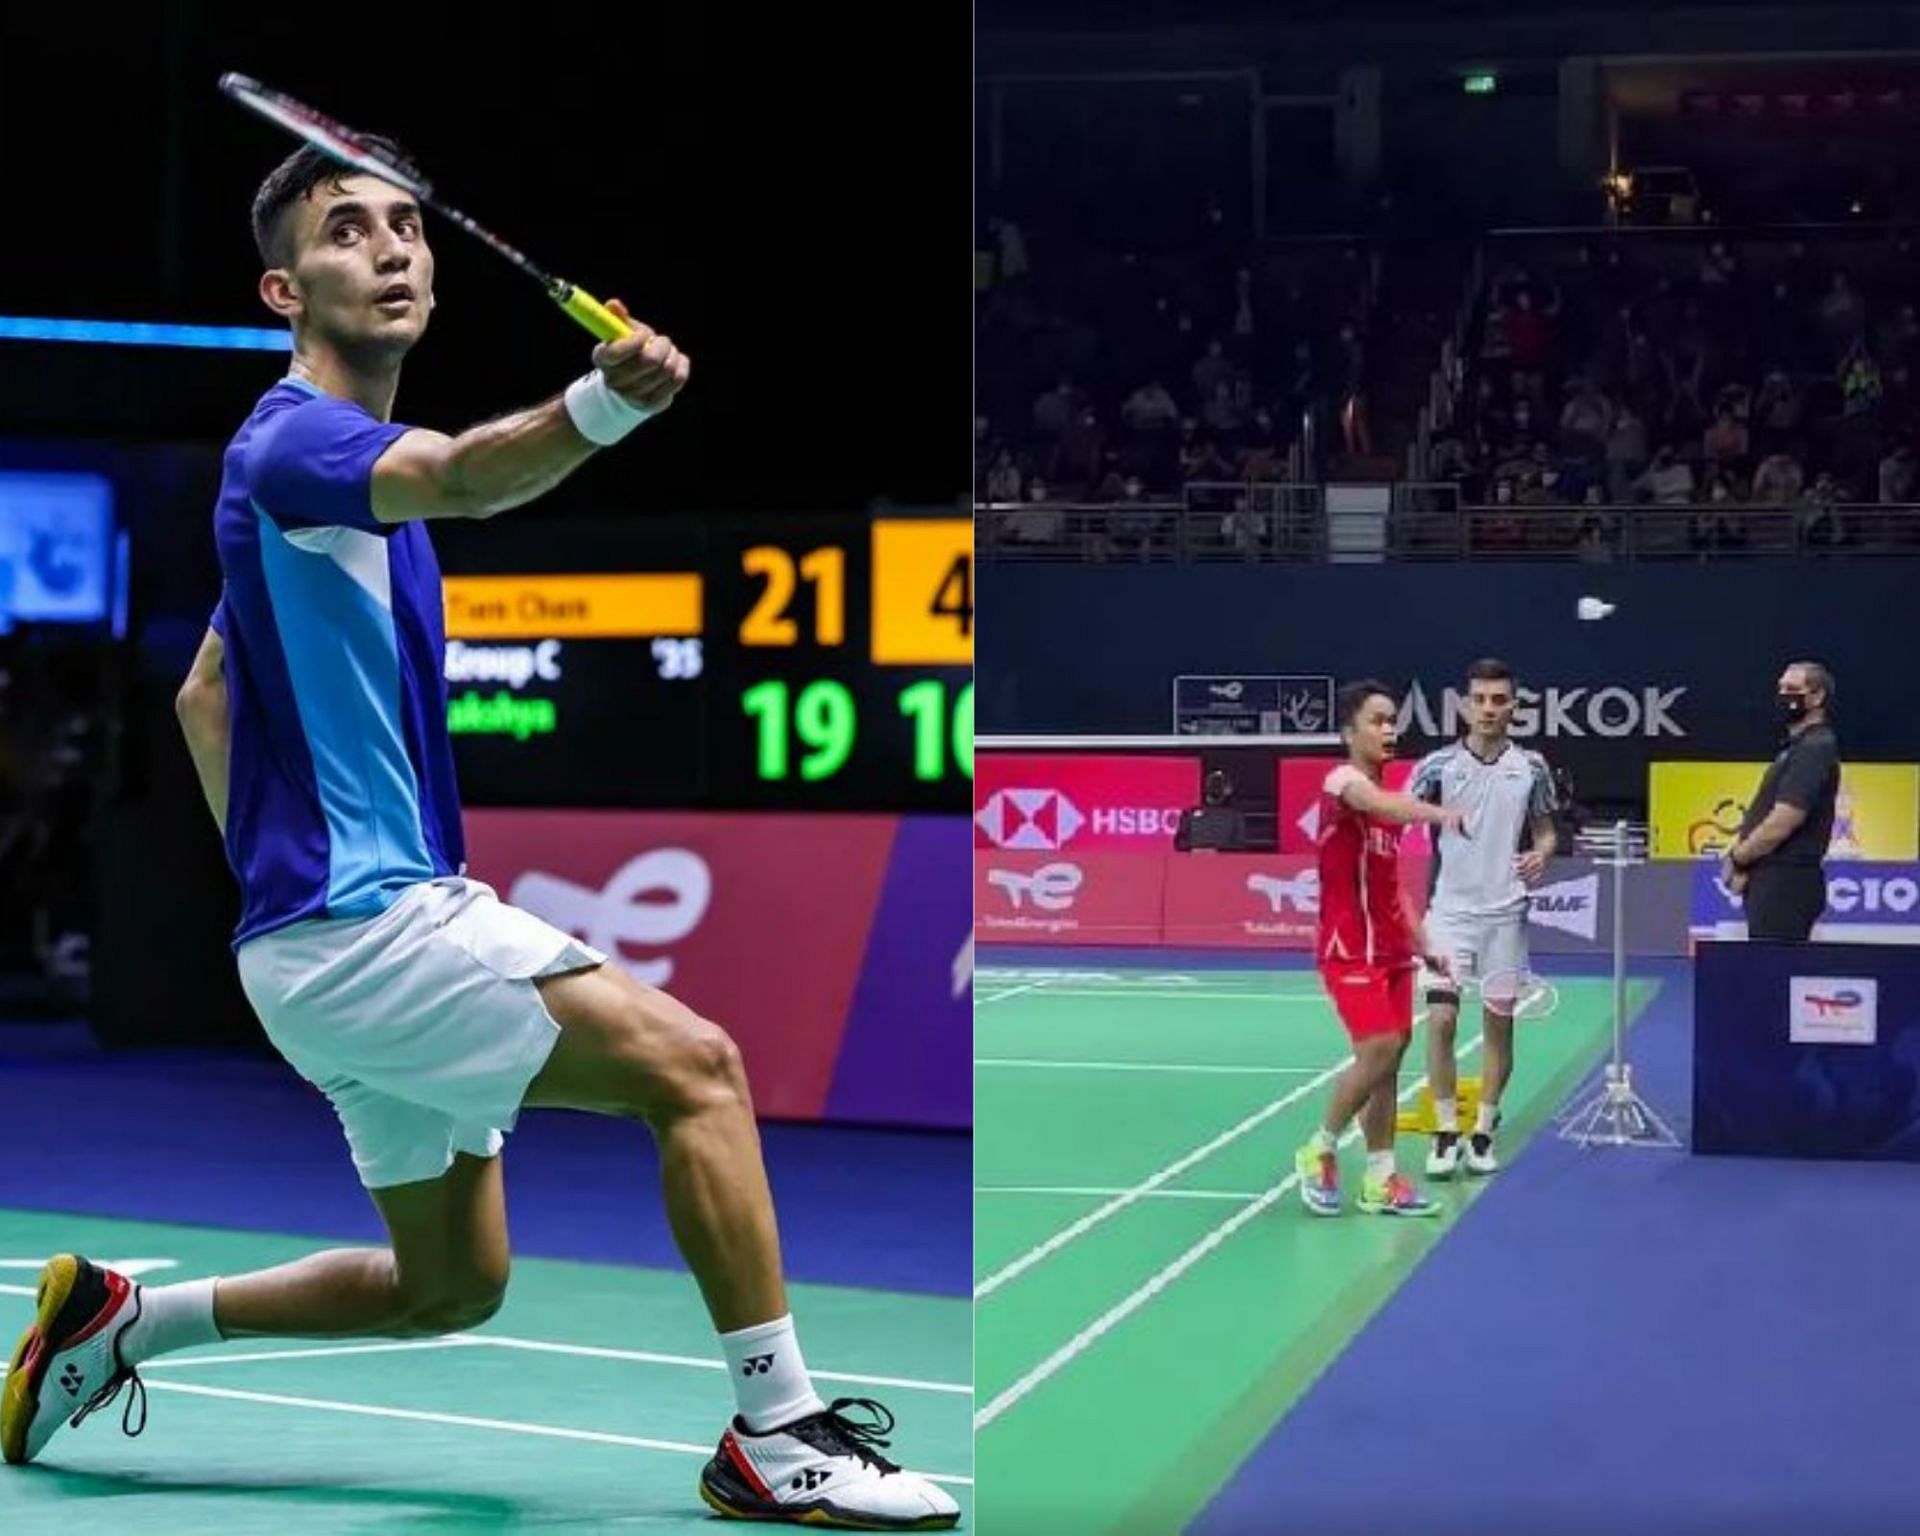 WATCH Lakshya Sen celebrates by falling on the floor after beating Anthony Ginting to give India 1-0 lead in Thomas Cup 2022 final